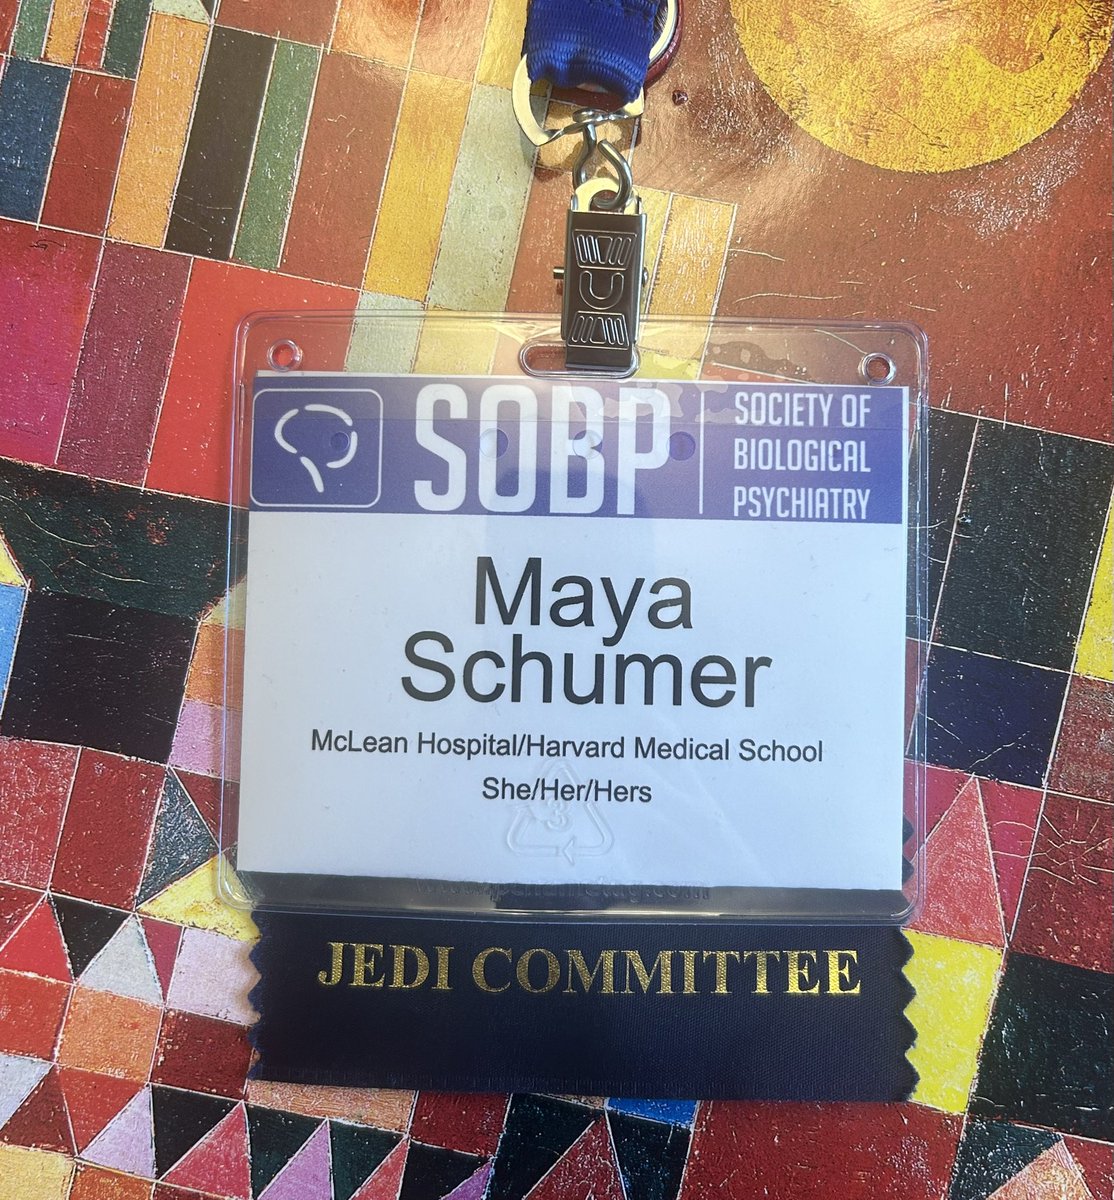 #SOBP2024 was a very special & exciting one for me, as it was the first time that there was a panel/event on #livedexperience, #stigma & #disclosure @SOBP. As a researcher w/ lived experience, this was something I had always wanted to see. Many thanks to our panelists & JEDI! 💙